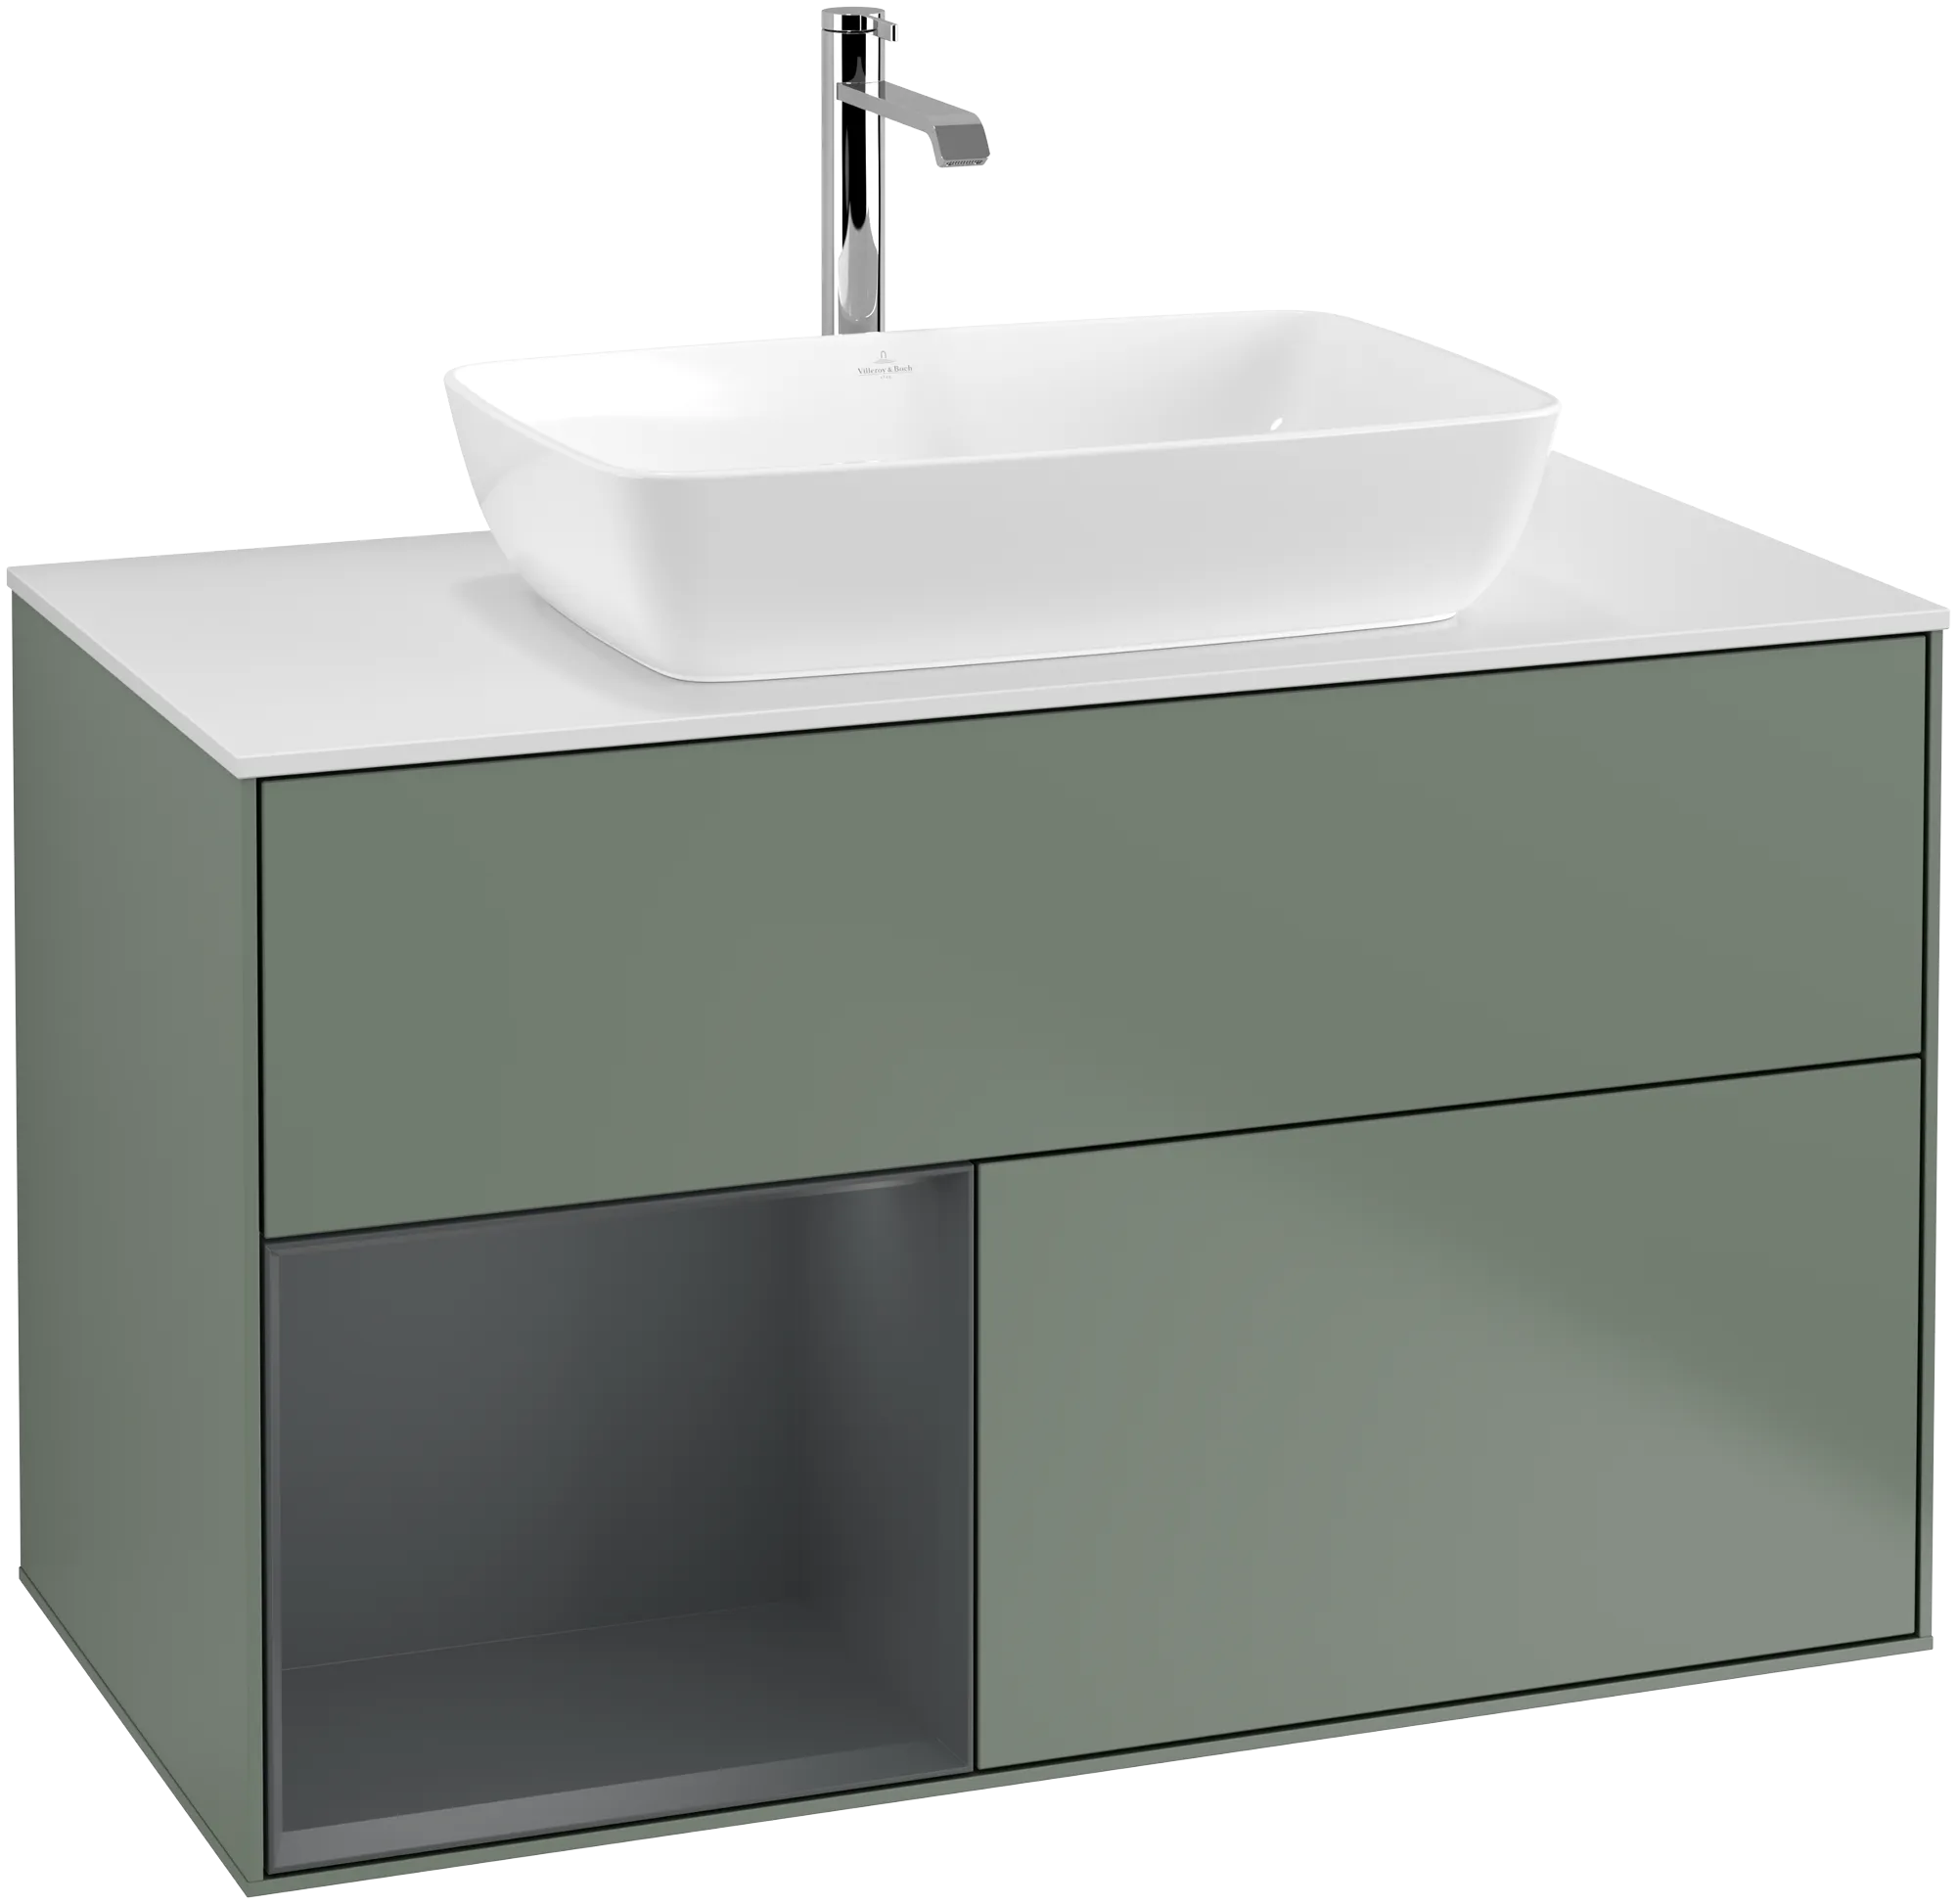 Picture of VILLEROY BOCH Finion Vanity unit, with lighting, 2 pull-out compartments, 1000 x 603 x 501 mm, Olive Matt Lacquer / Midnight Blue Matt Lacquer / Glass White Matt #G771HGGM